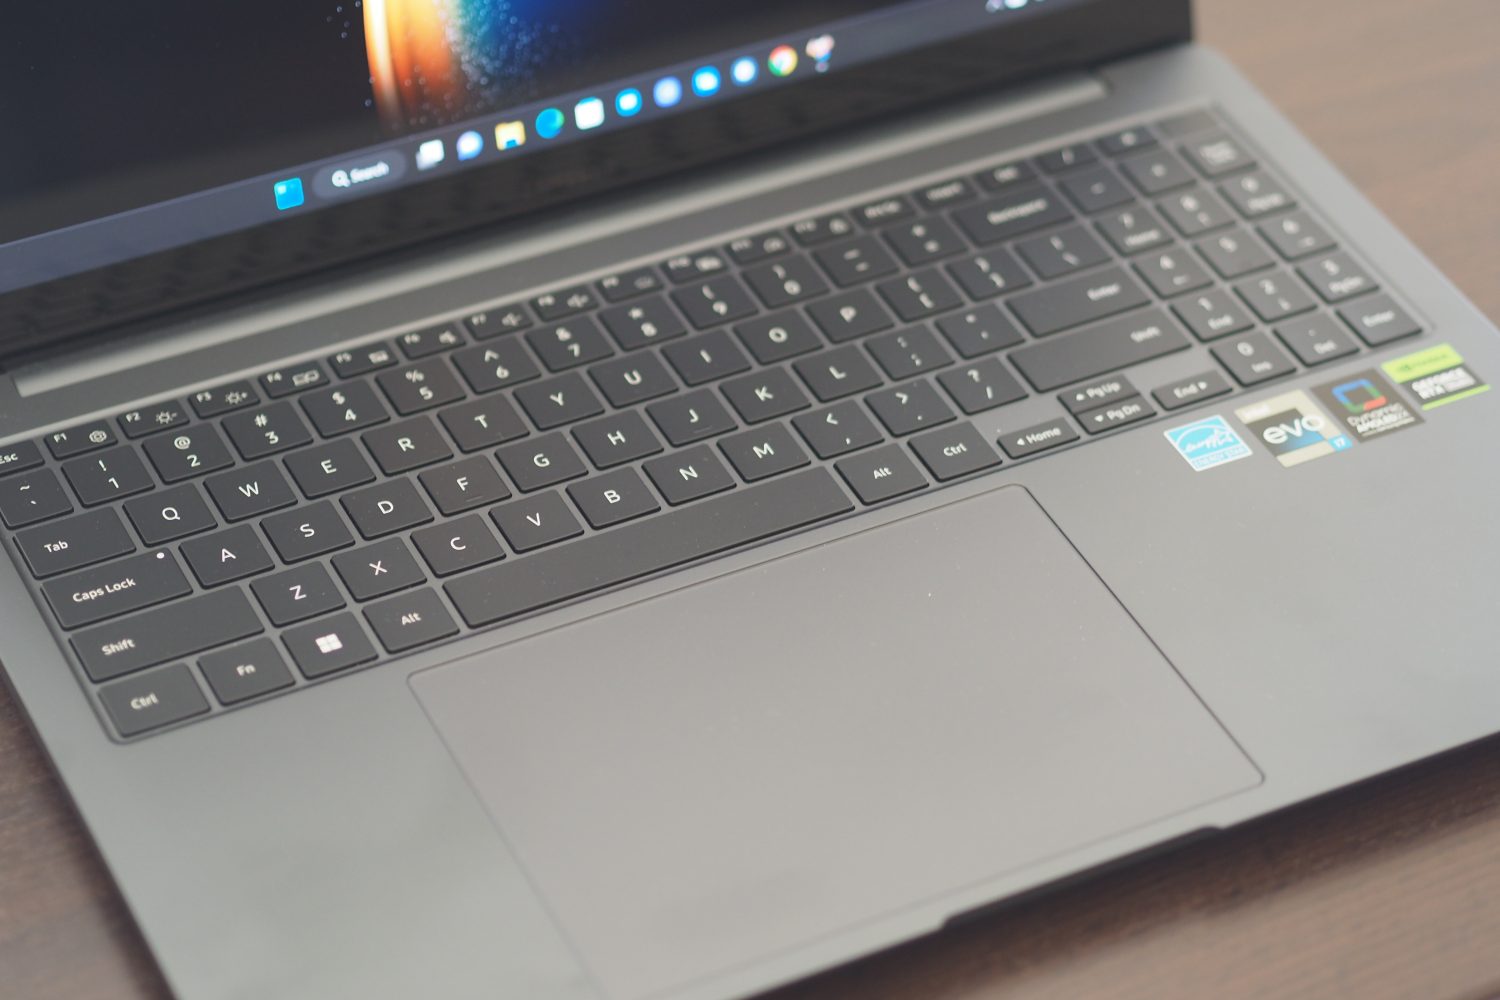 Samsung Galaxy Book3 Ultra top down view showing keyboard and touchpad.